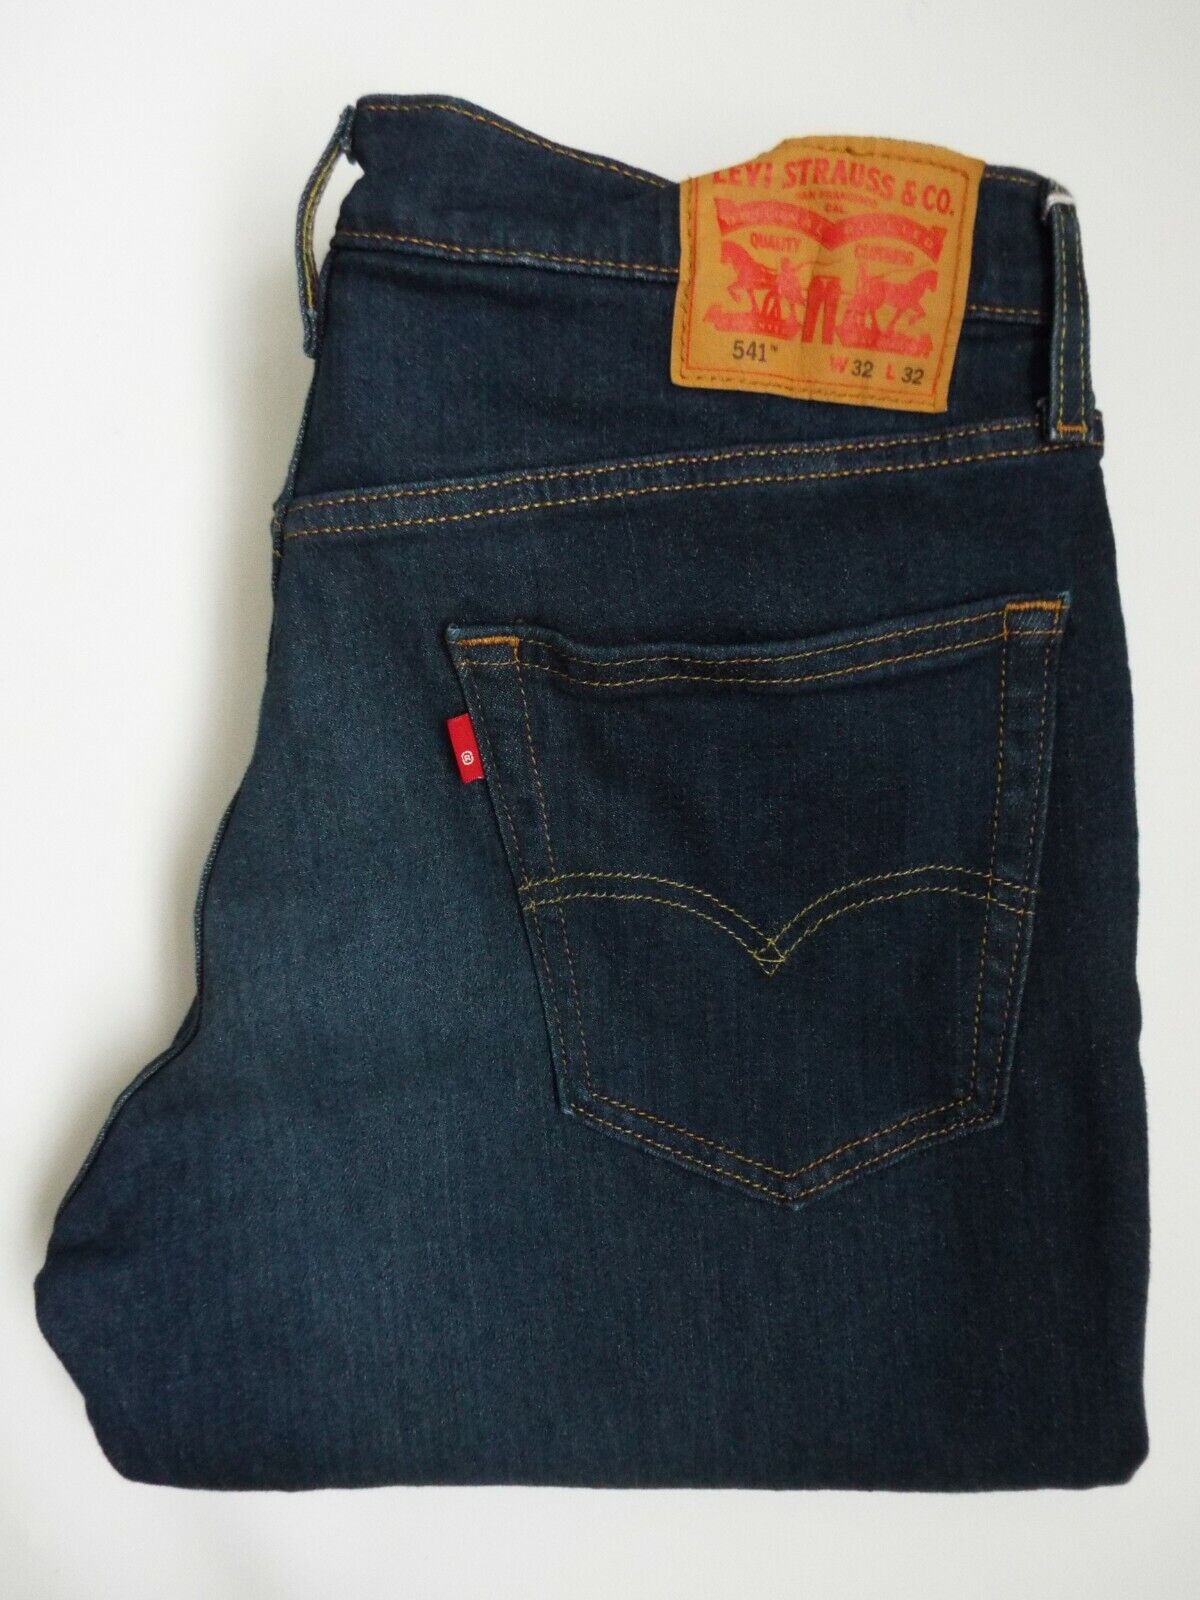 LEVIapos;S 541 JEANS MENapos;S STRETCH Los Angeles Mall ATHLETIC W3 Selling rankings TAPERED LEG